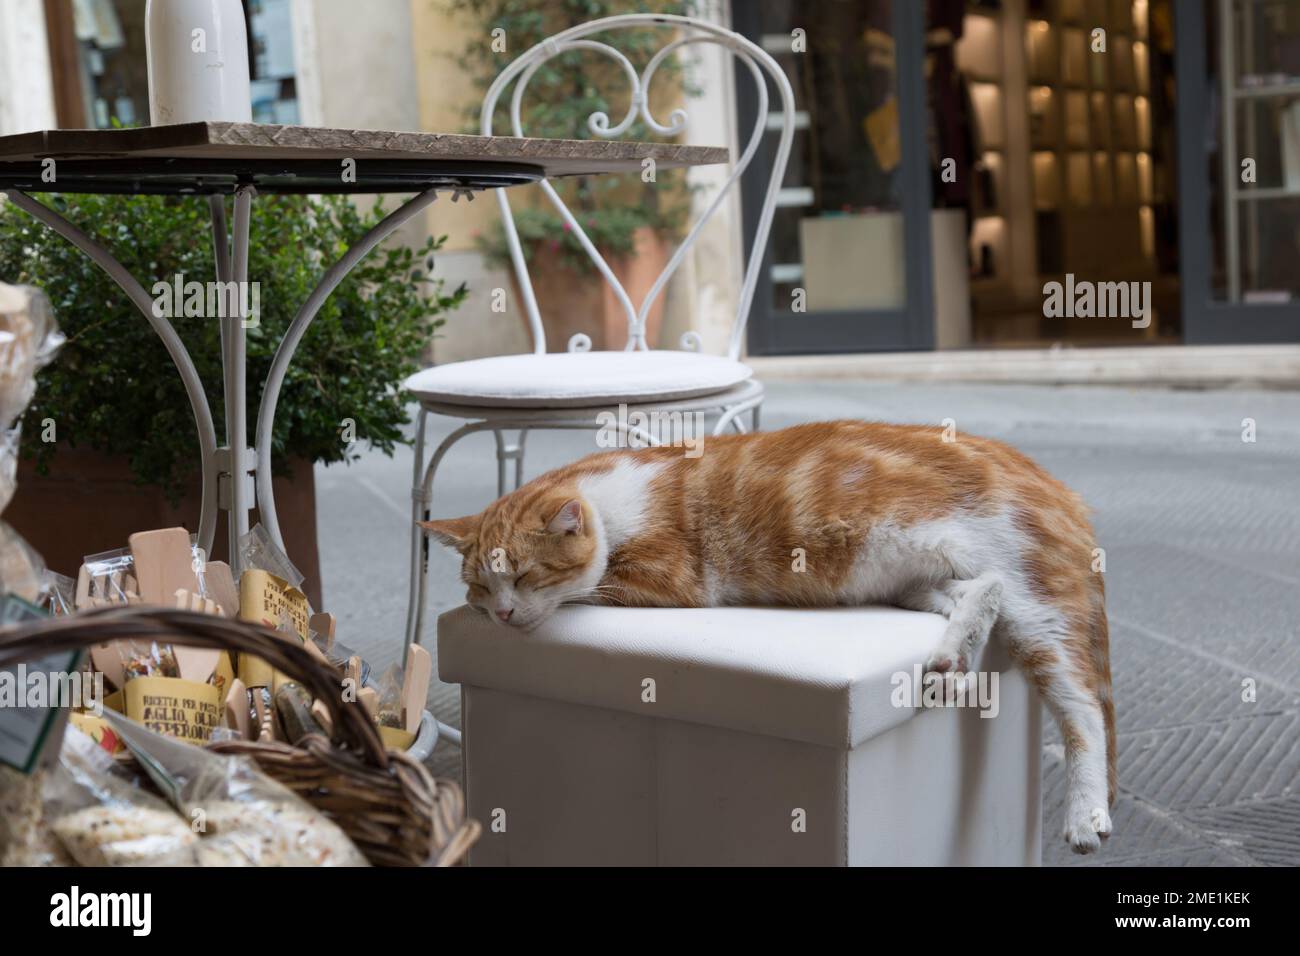 Orange and white cat sleeping on a stool outside of restaurant in San Quirico d'Orcia, Tuscany, Italy. Stock Photo